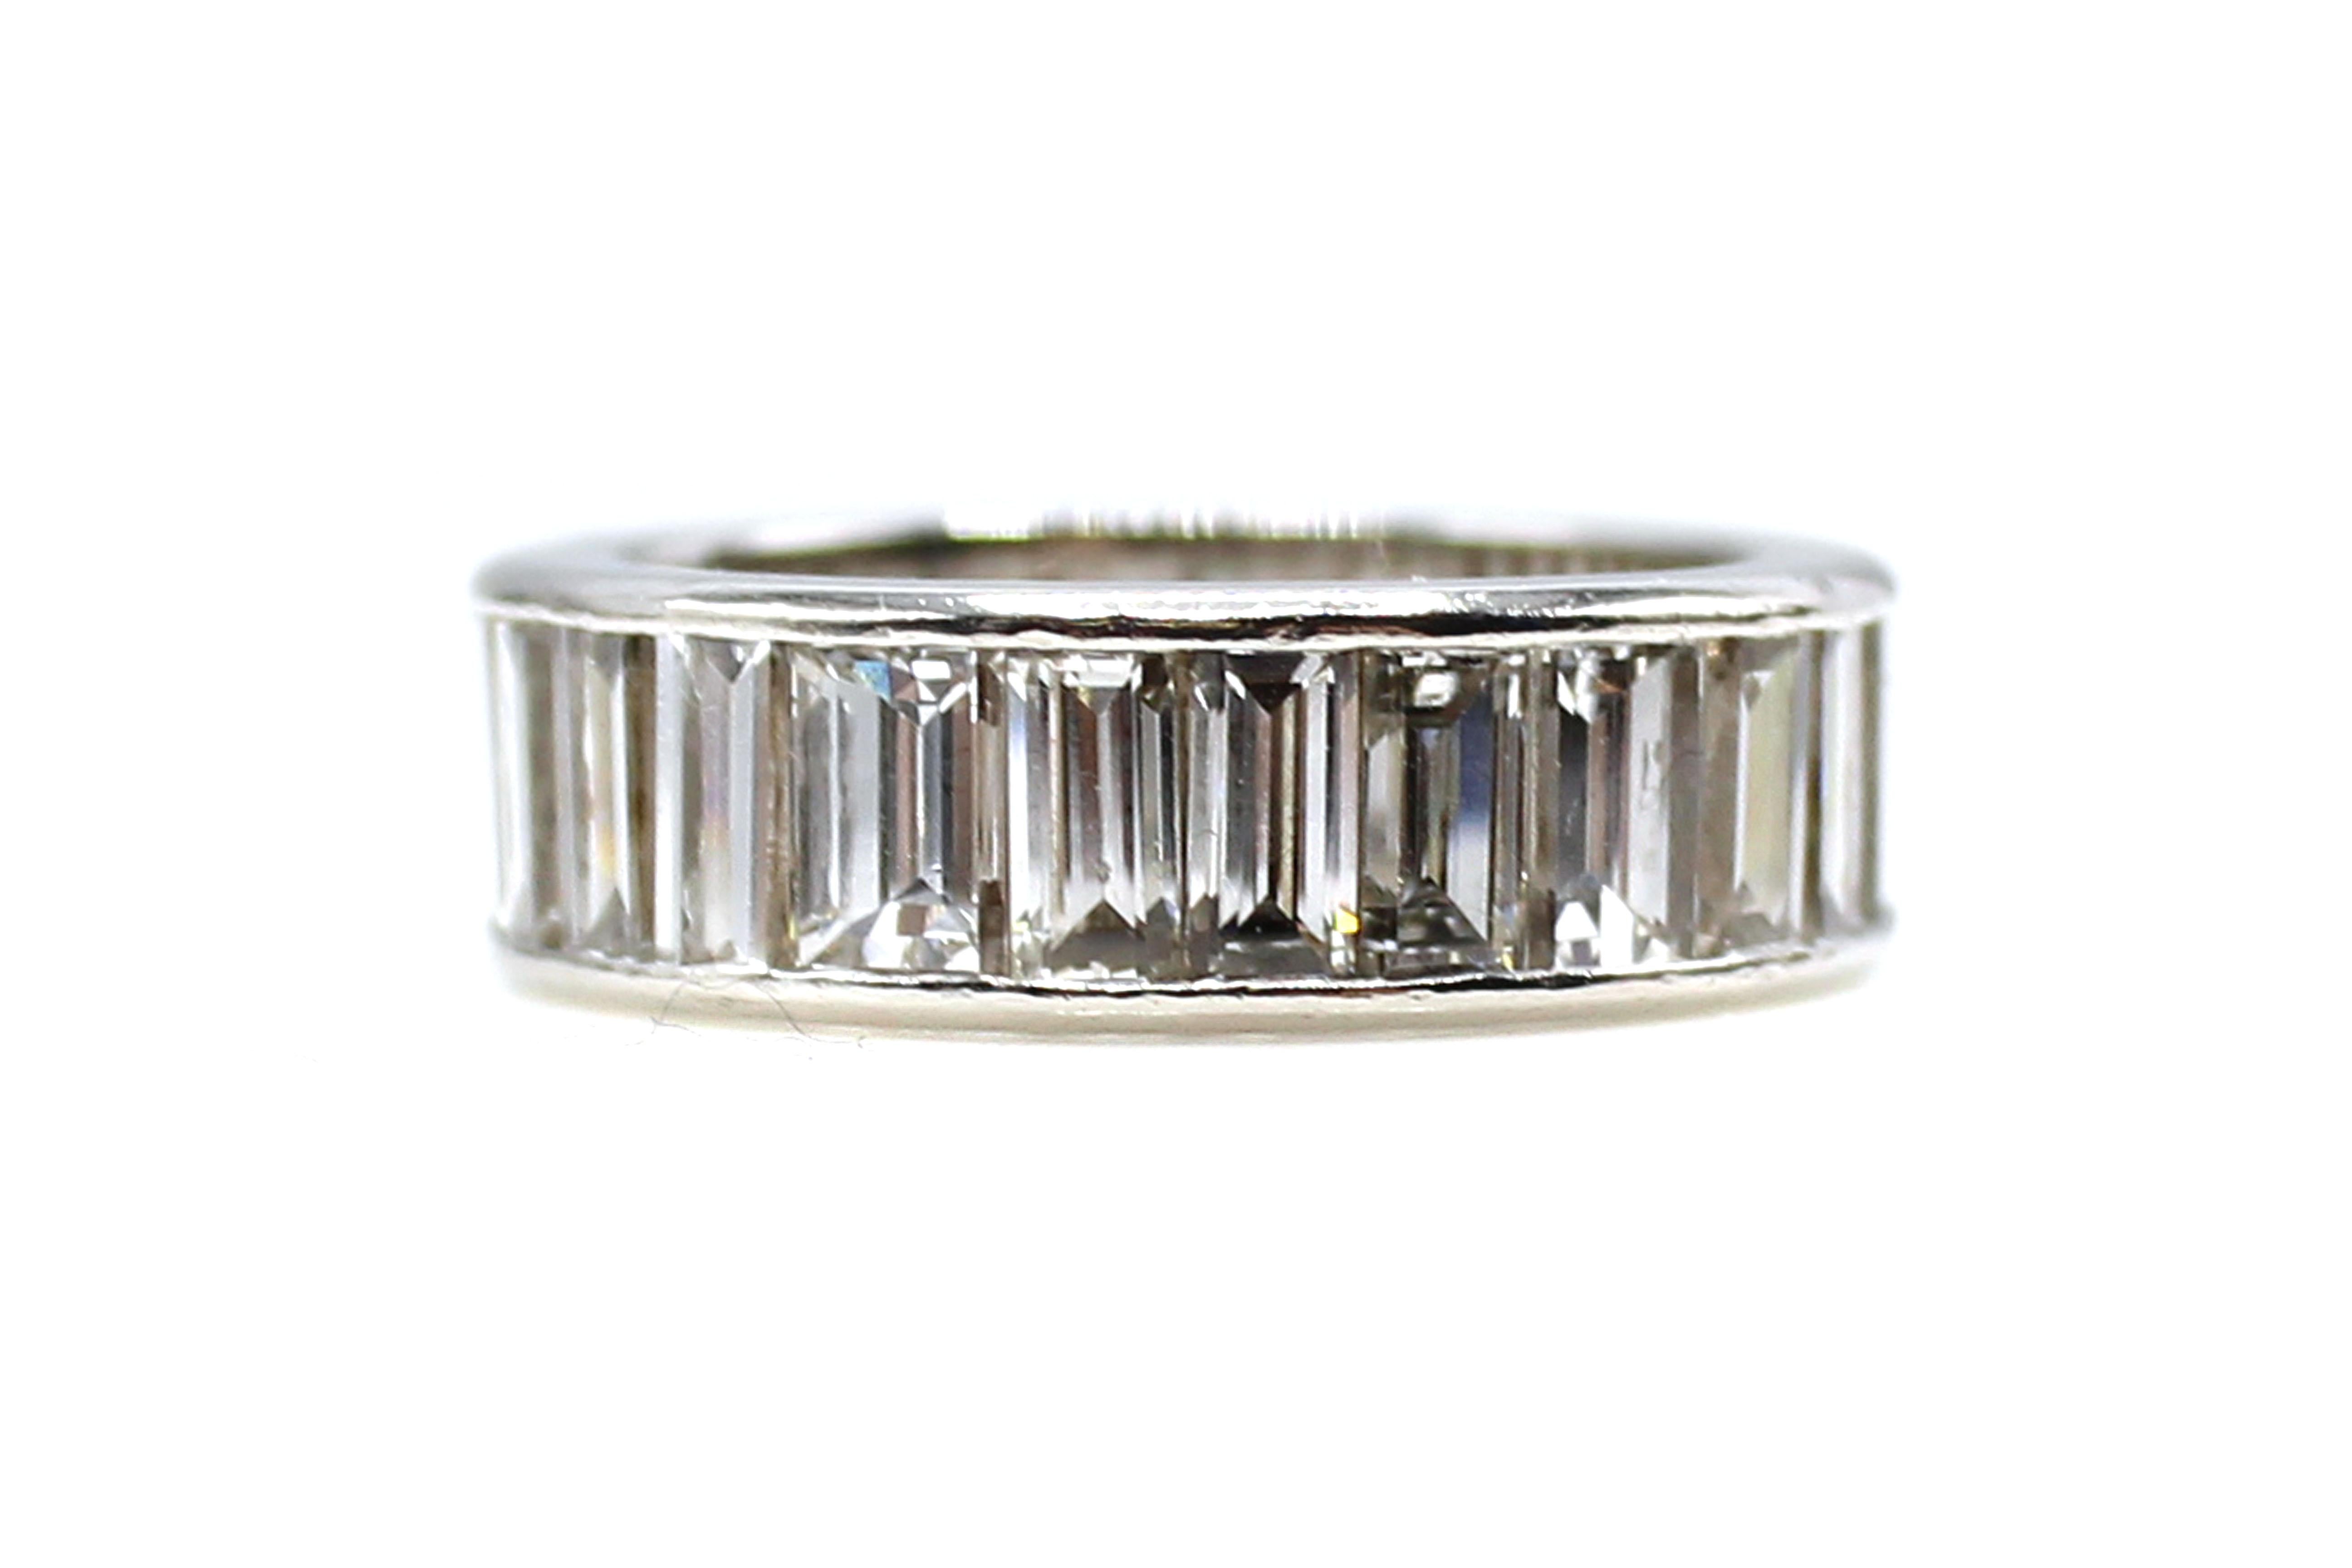 This exquisite beautifully hand-crafted eternity band is channel set with 32 bright white and sparkly baguette cut diamonds with an approximate total diamond weight of 8 carats. The baguettes measure over 6 millimeters in length, which is quite